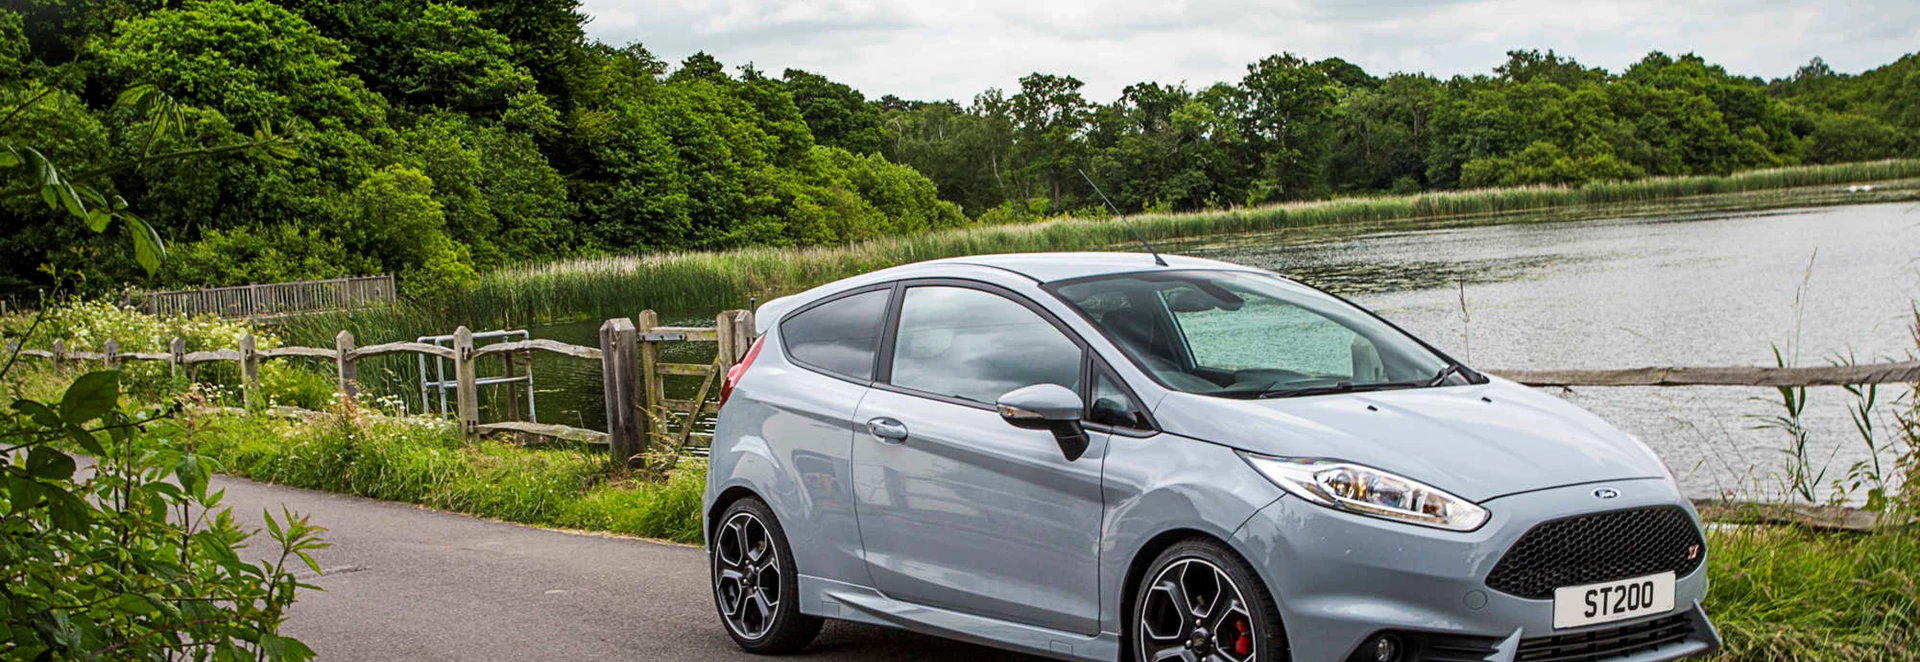 Ford Fiesta ST200 review 